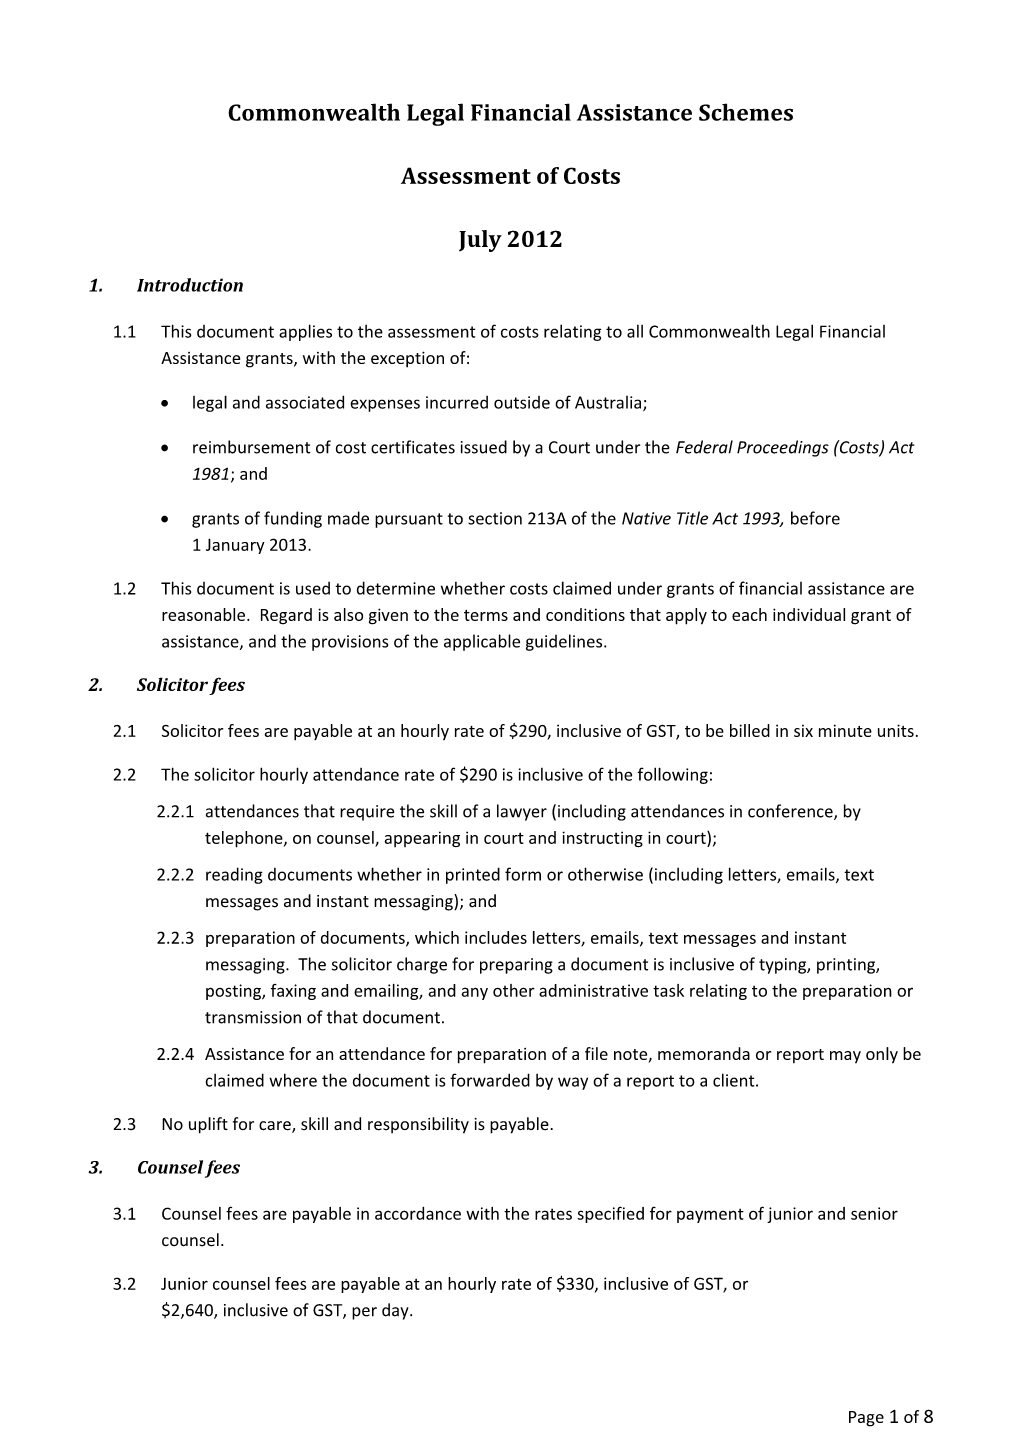 Assessment of Costs - Commonwealth Financial Assistance - Draft